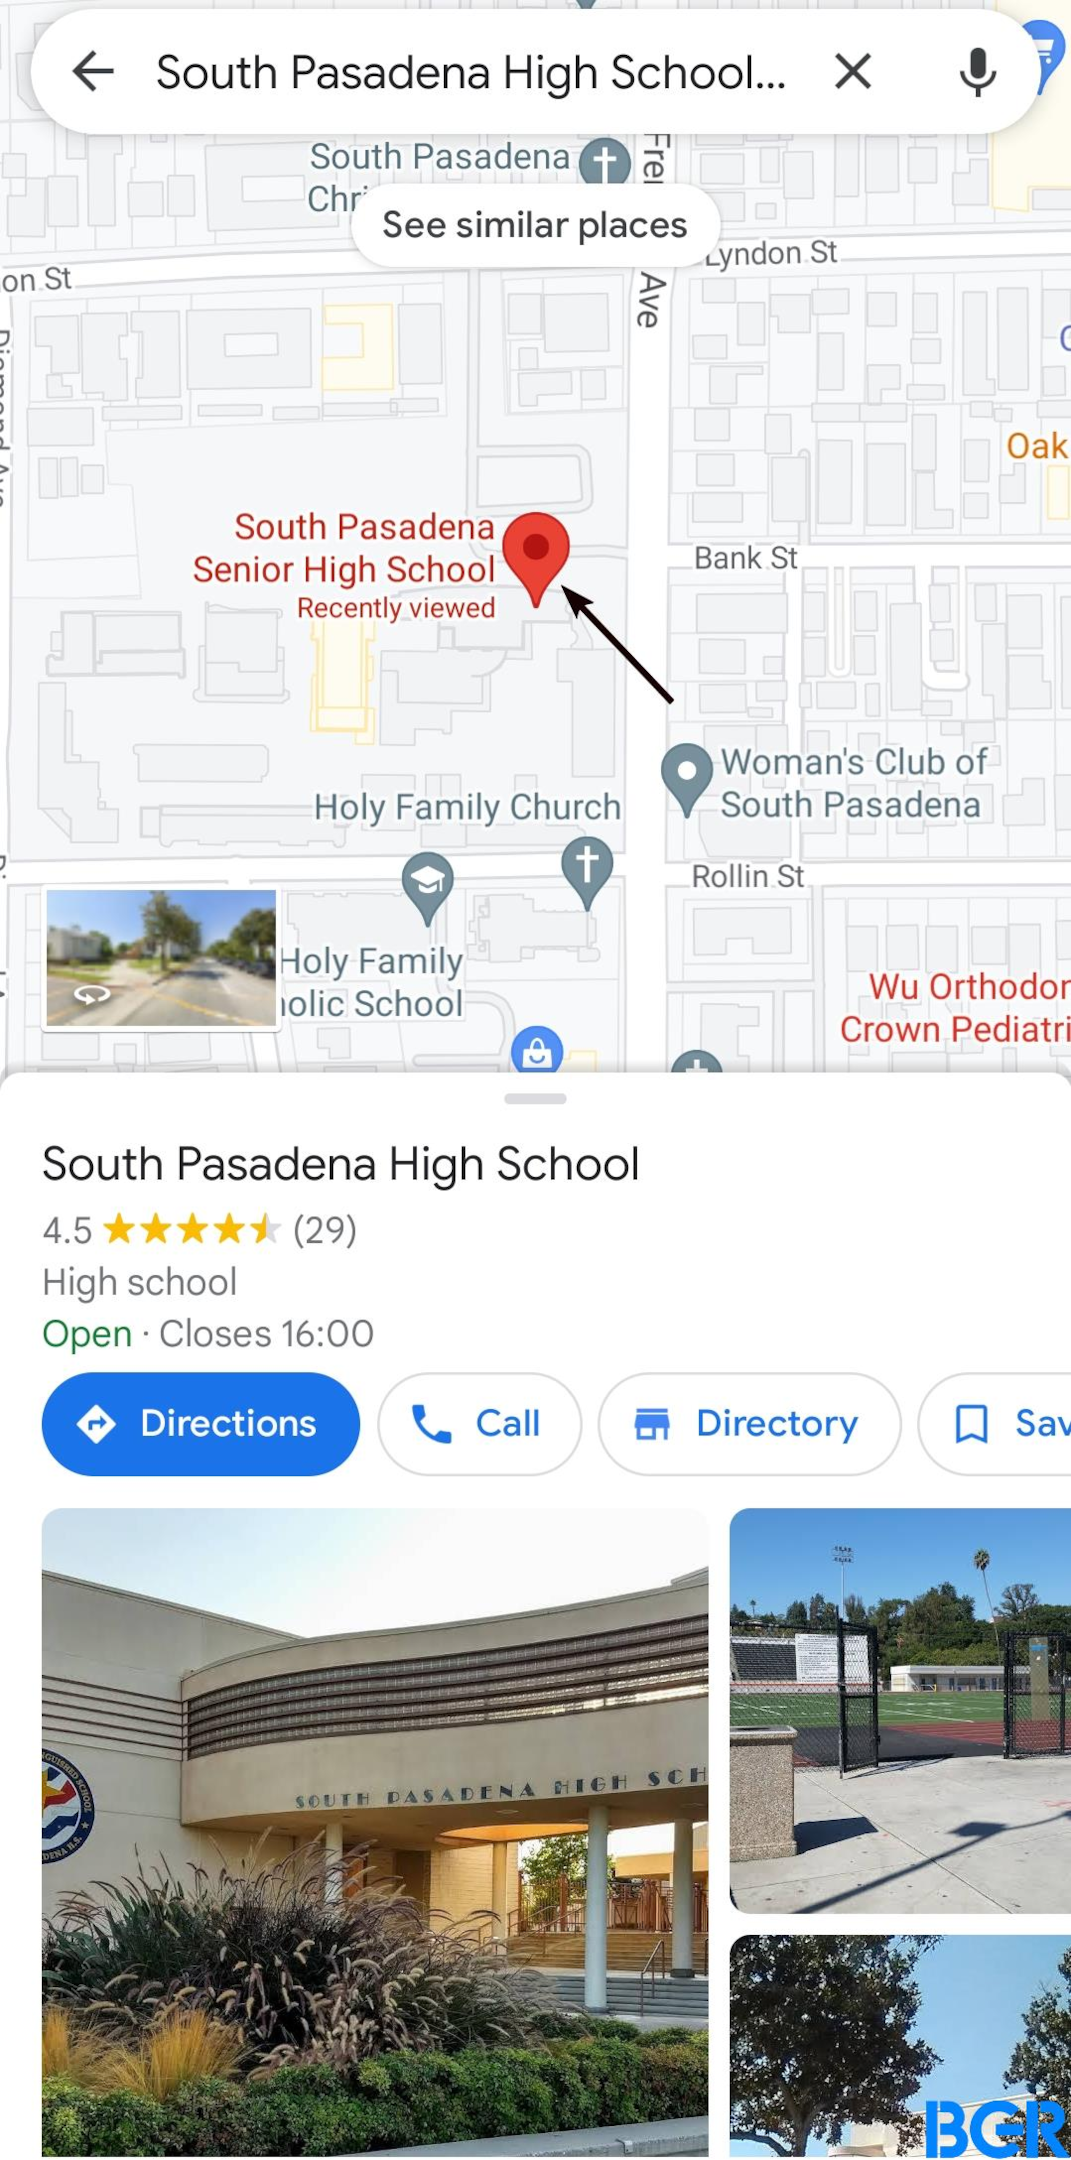 Dropped pin after searching for a place on Google Maps